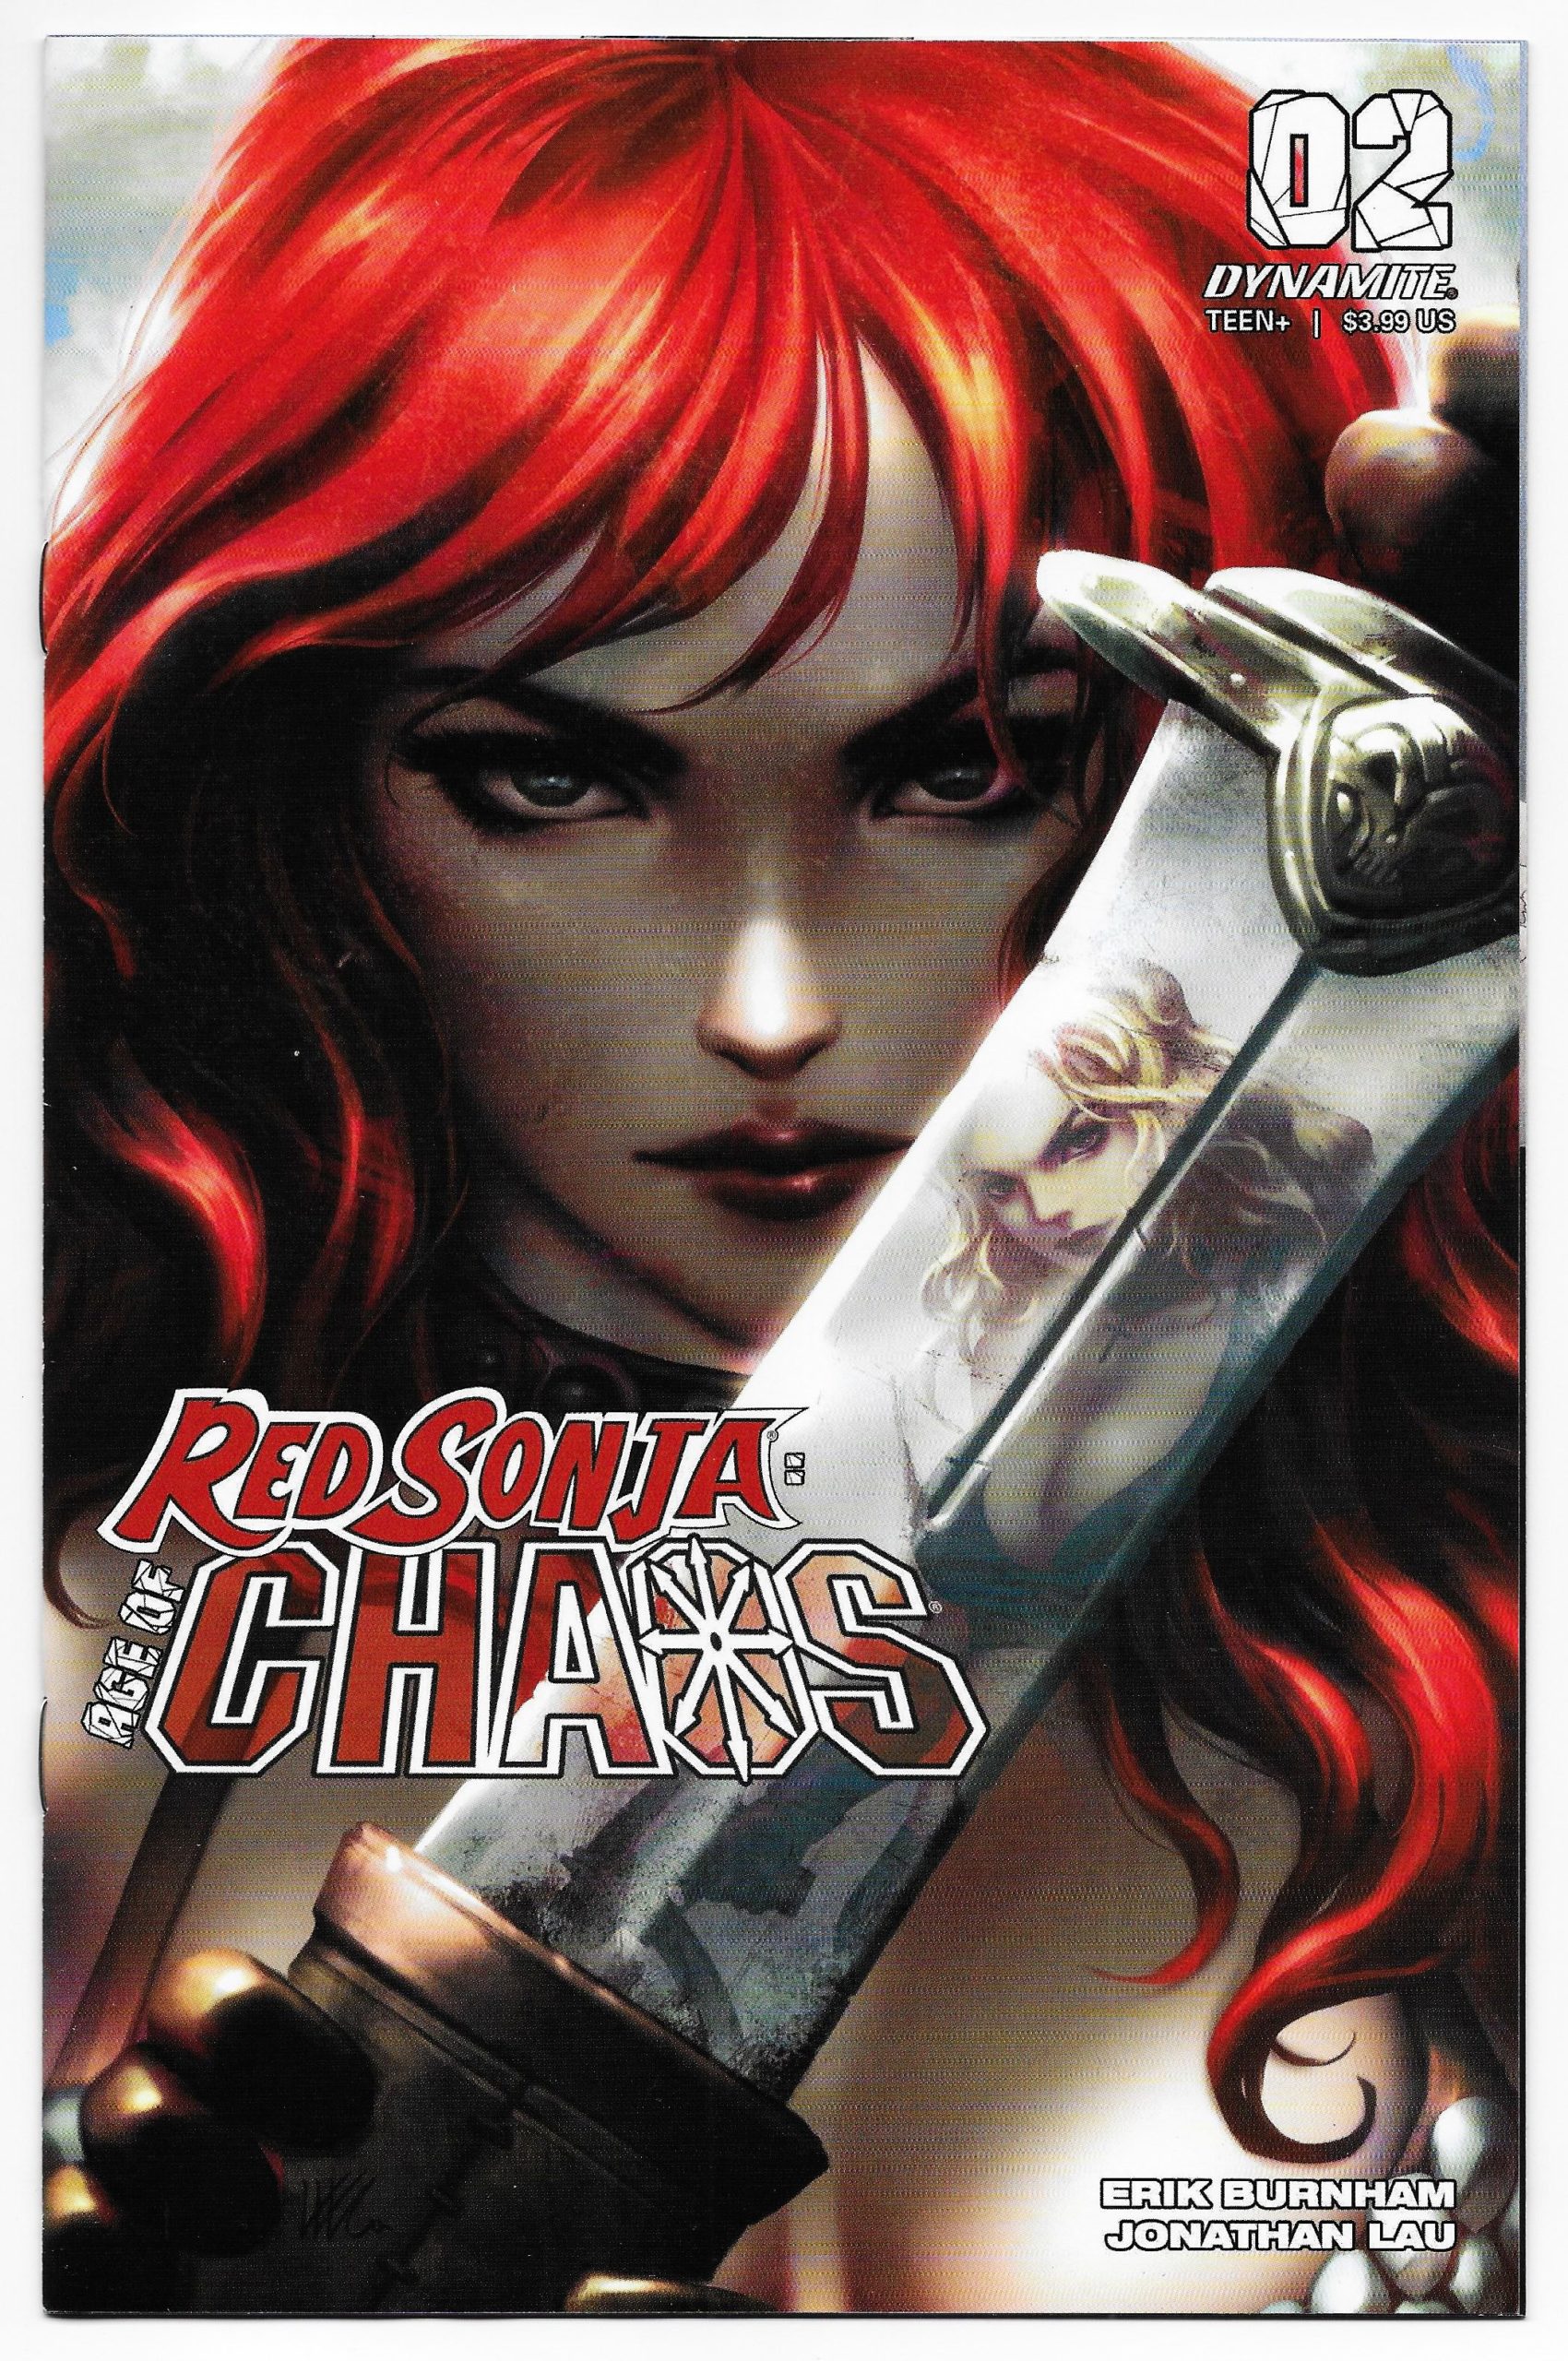 Red Sonja Age of Chaos #1 1:10 Variant VF/NM 2020 Dynamite 